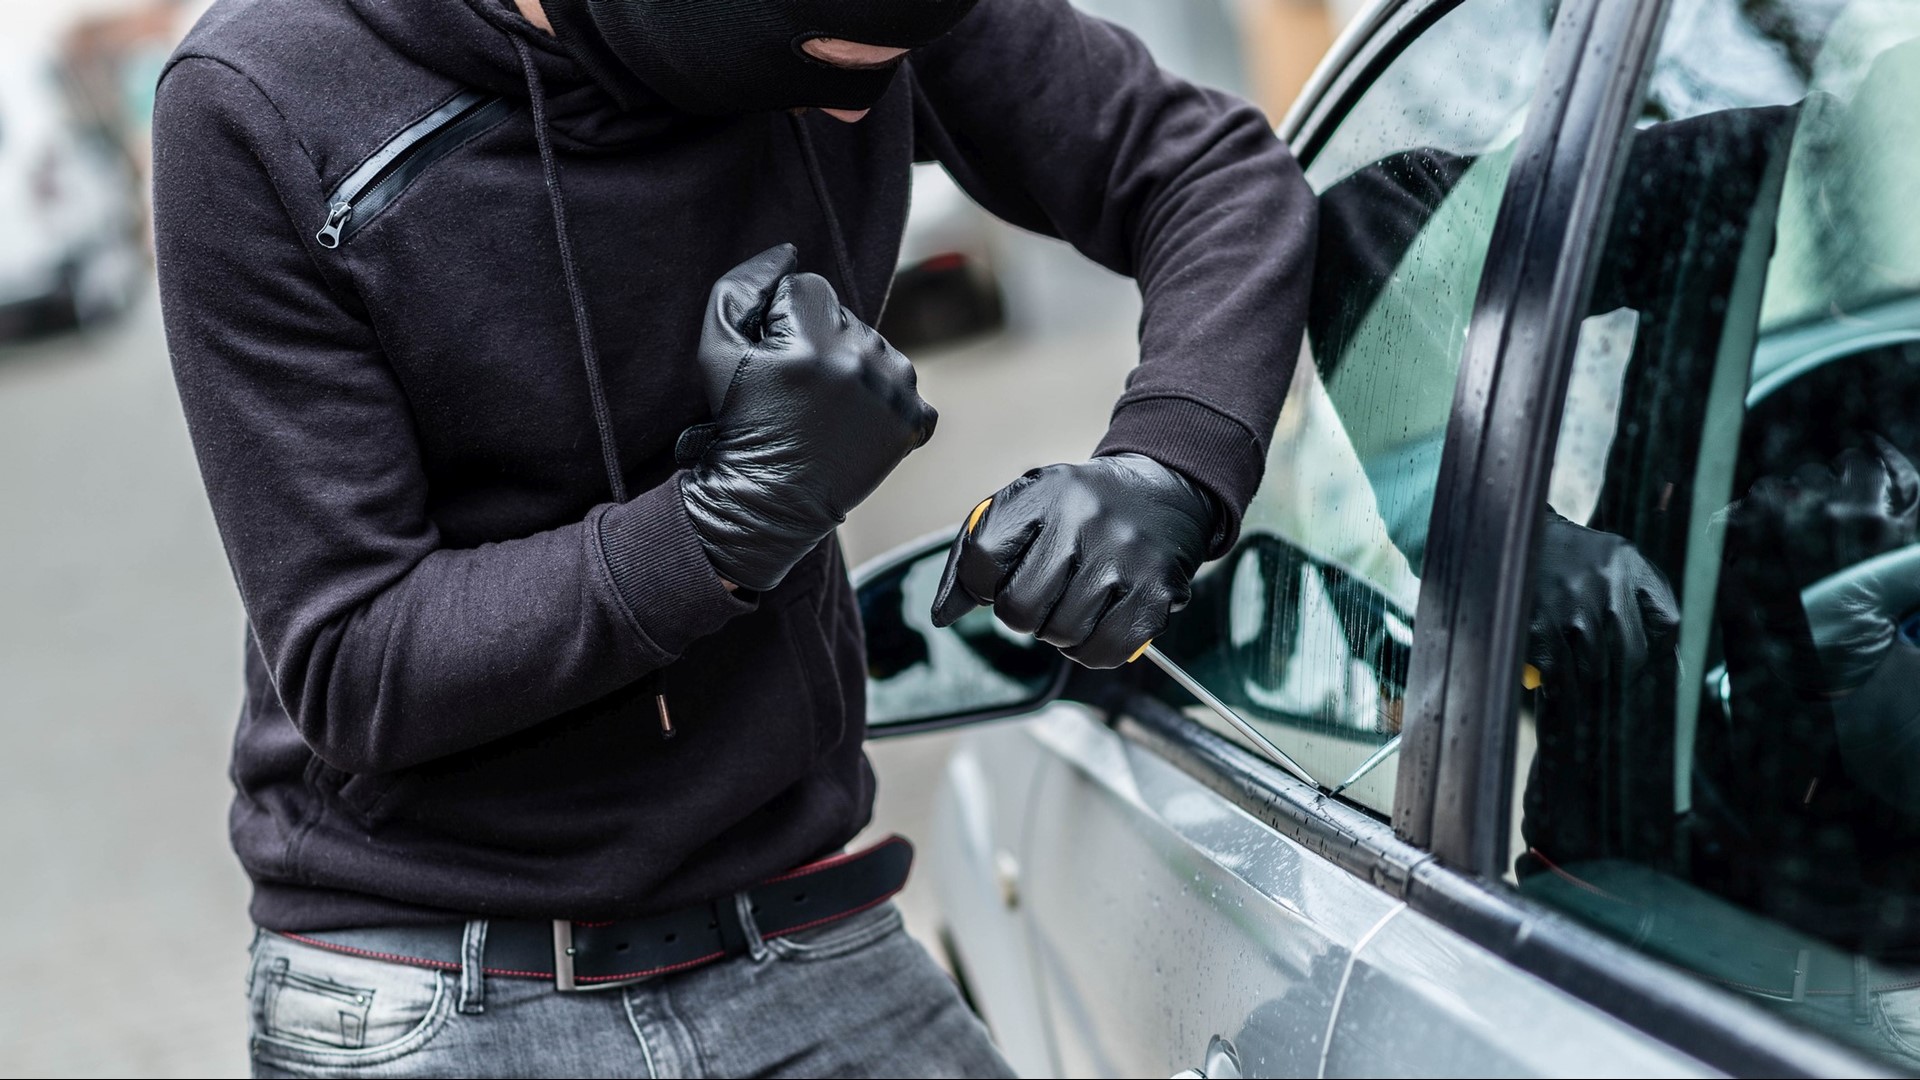 Thieves are targeting Kia and Hyundai cars across the country. Rock Island Police say 74 Kia and Hyundai cars were stolen in 2022 alone, more than any other model.